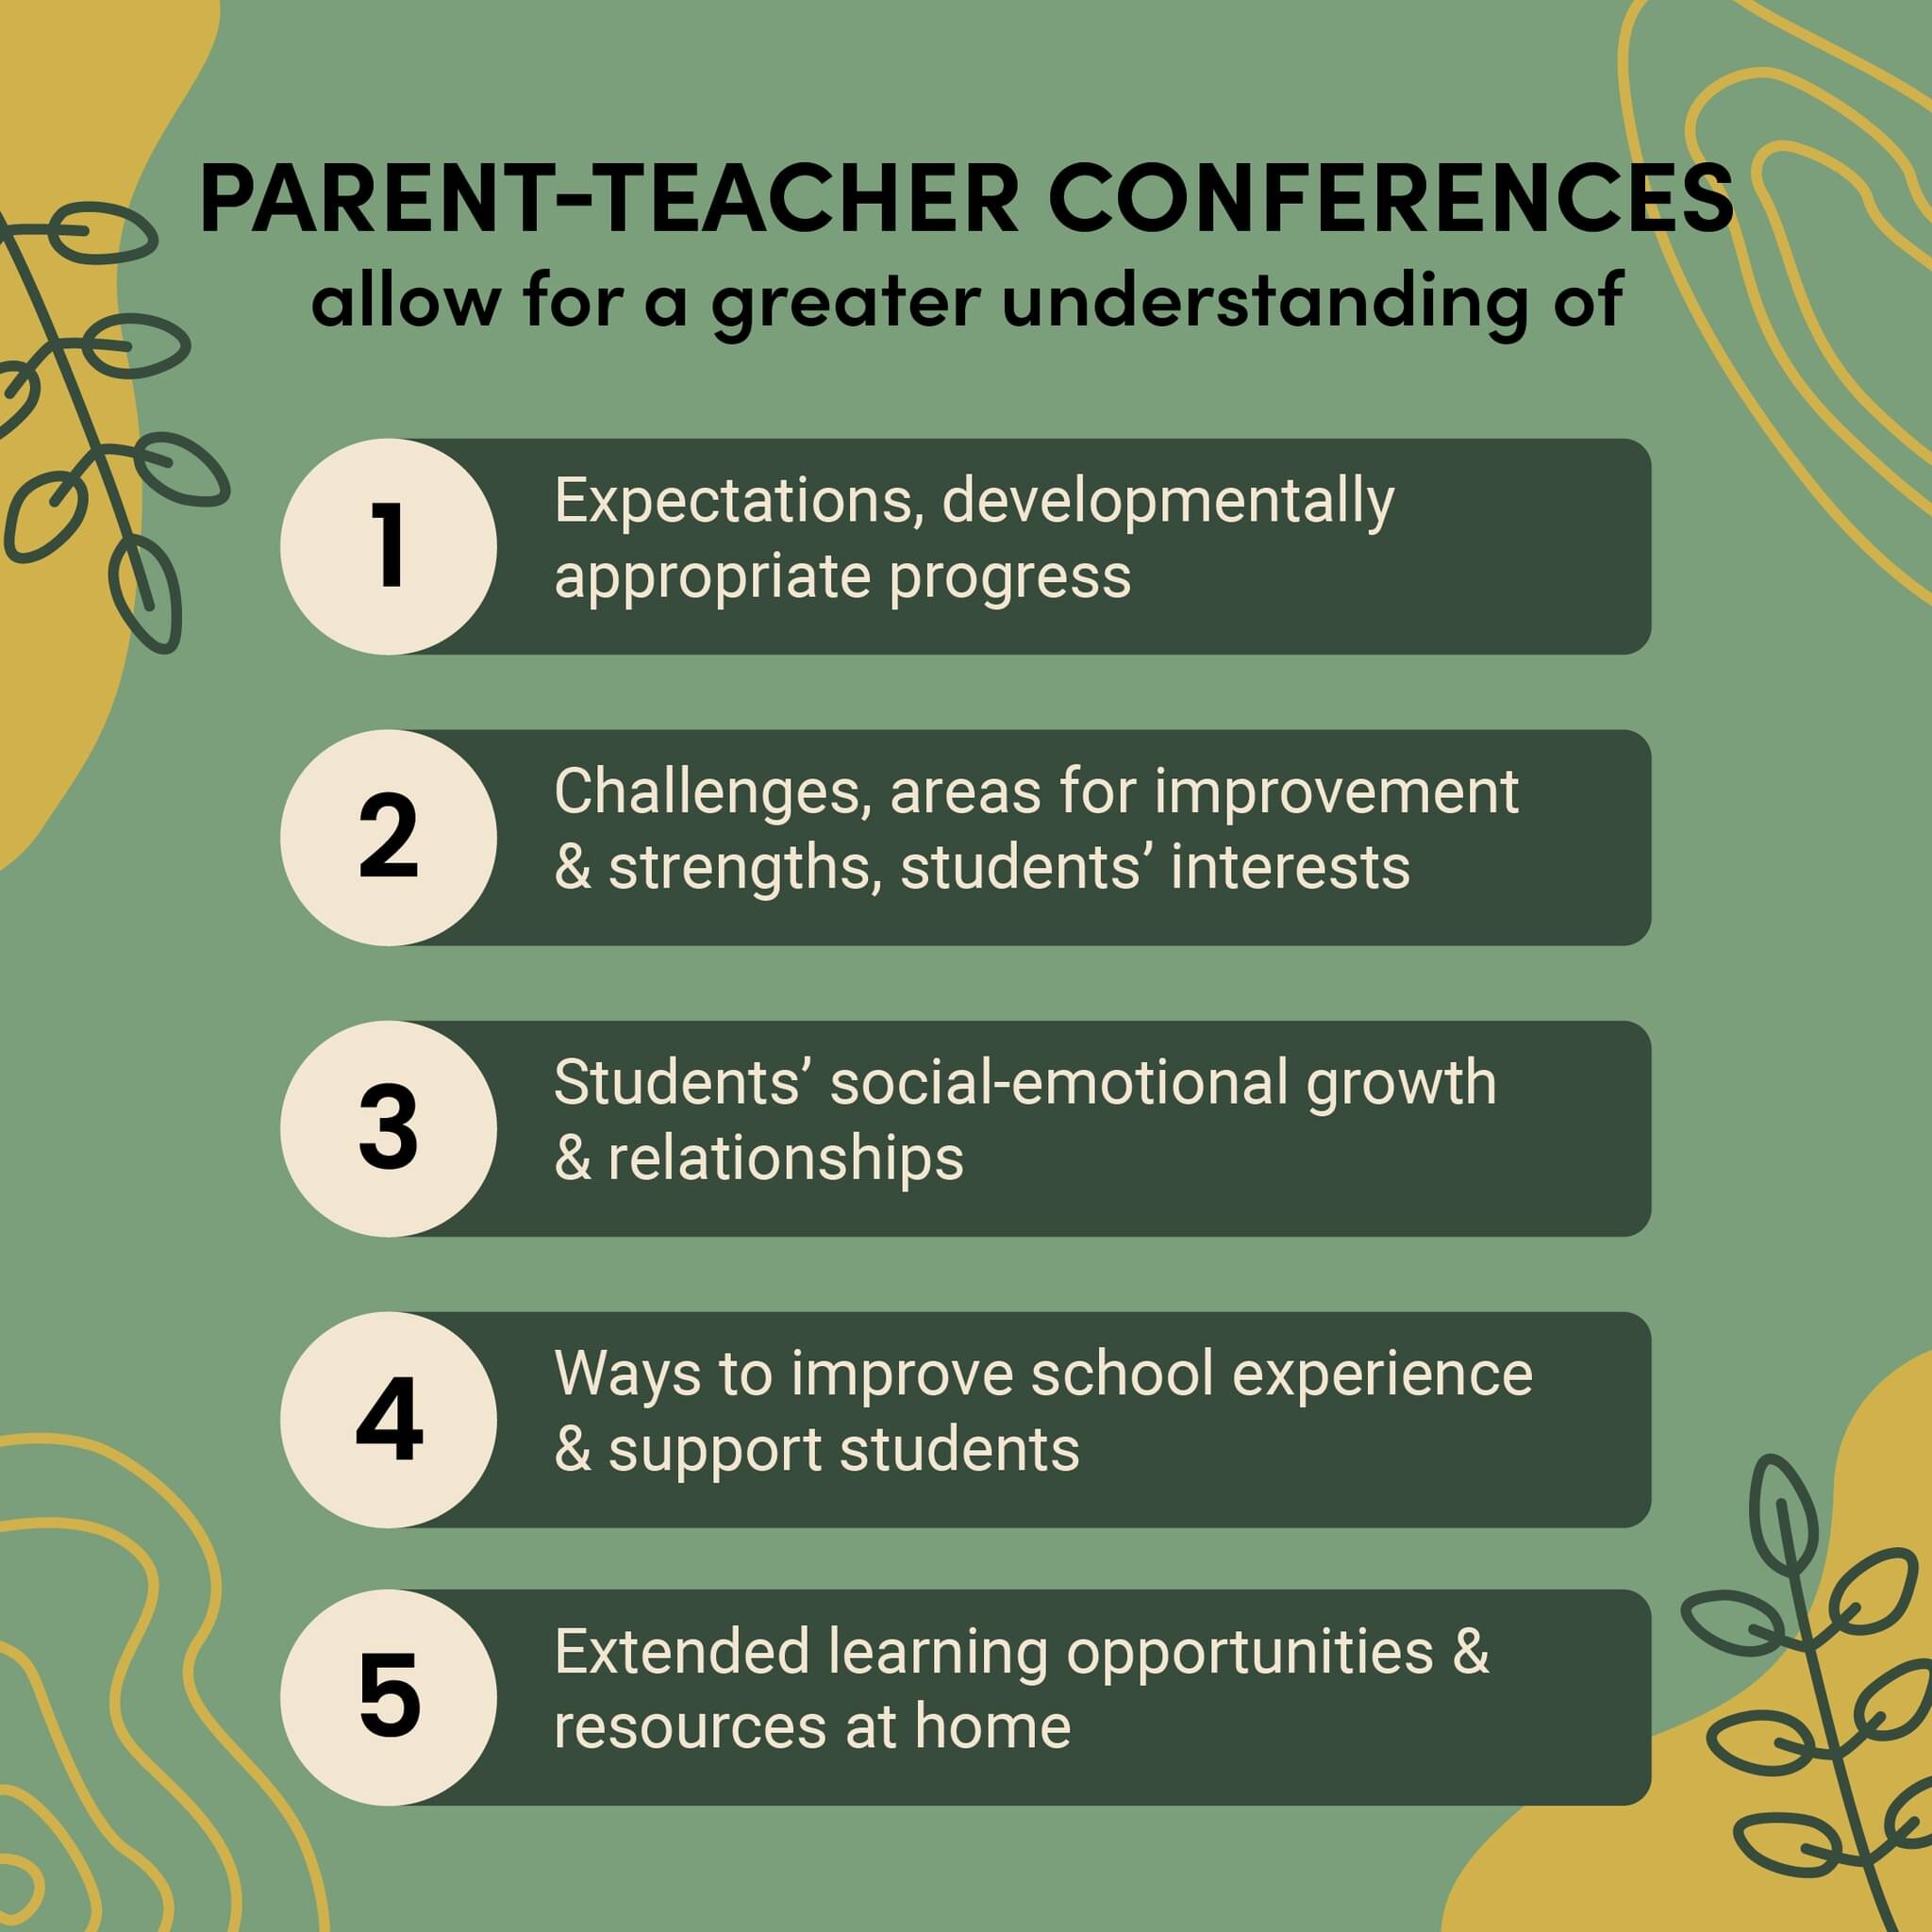 We have parent-teacher conferences at Stockton Montessori School because we want our students to be happy and reach their fullest potential. Communication between family members and teachers help us better understand students&rsquo; needs. Home and s